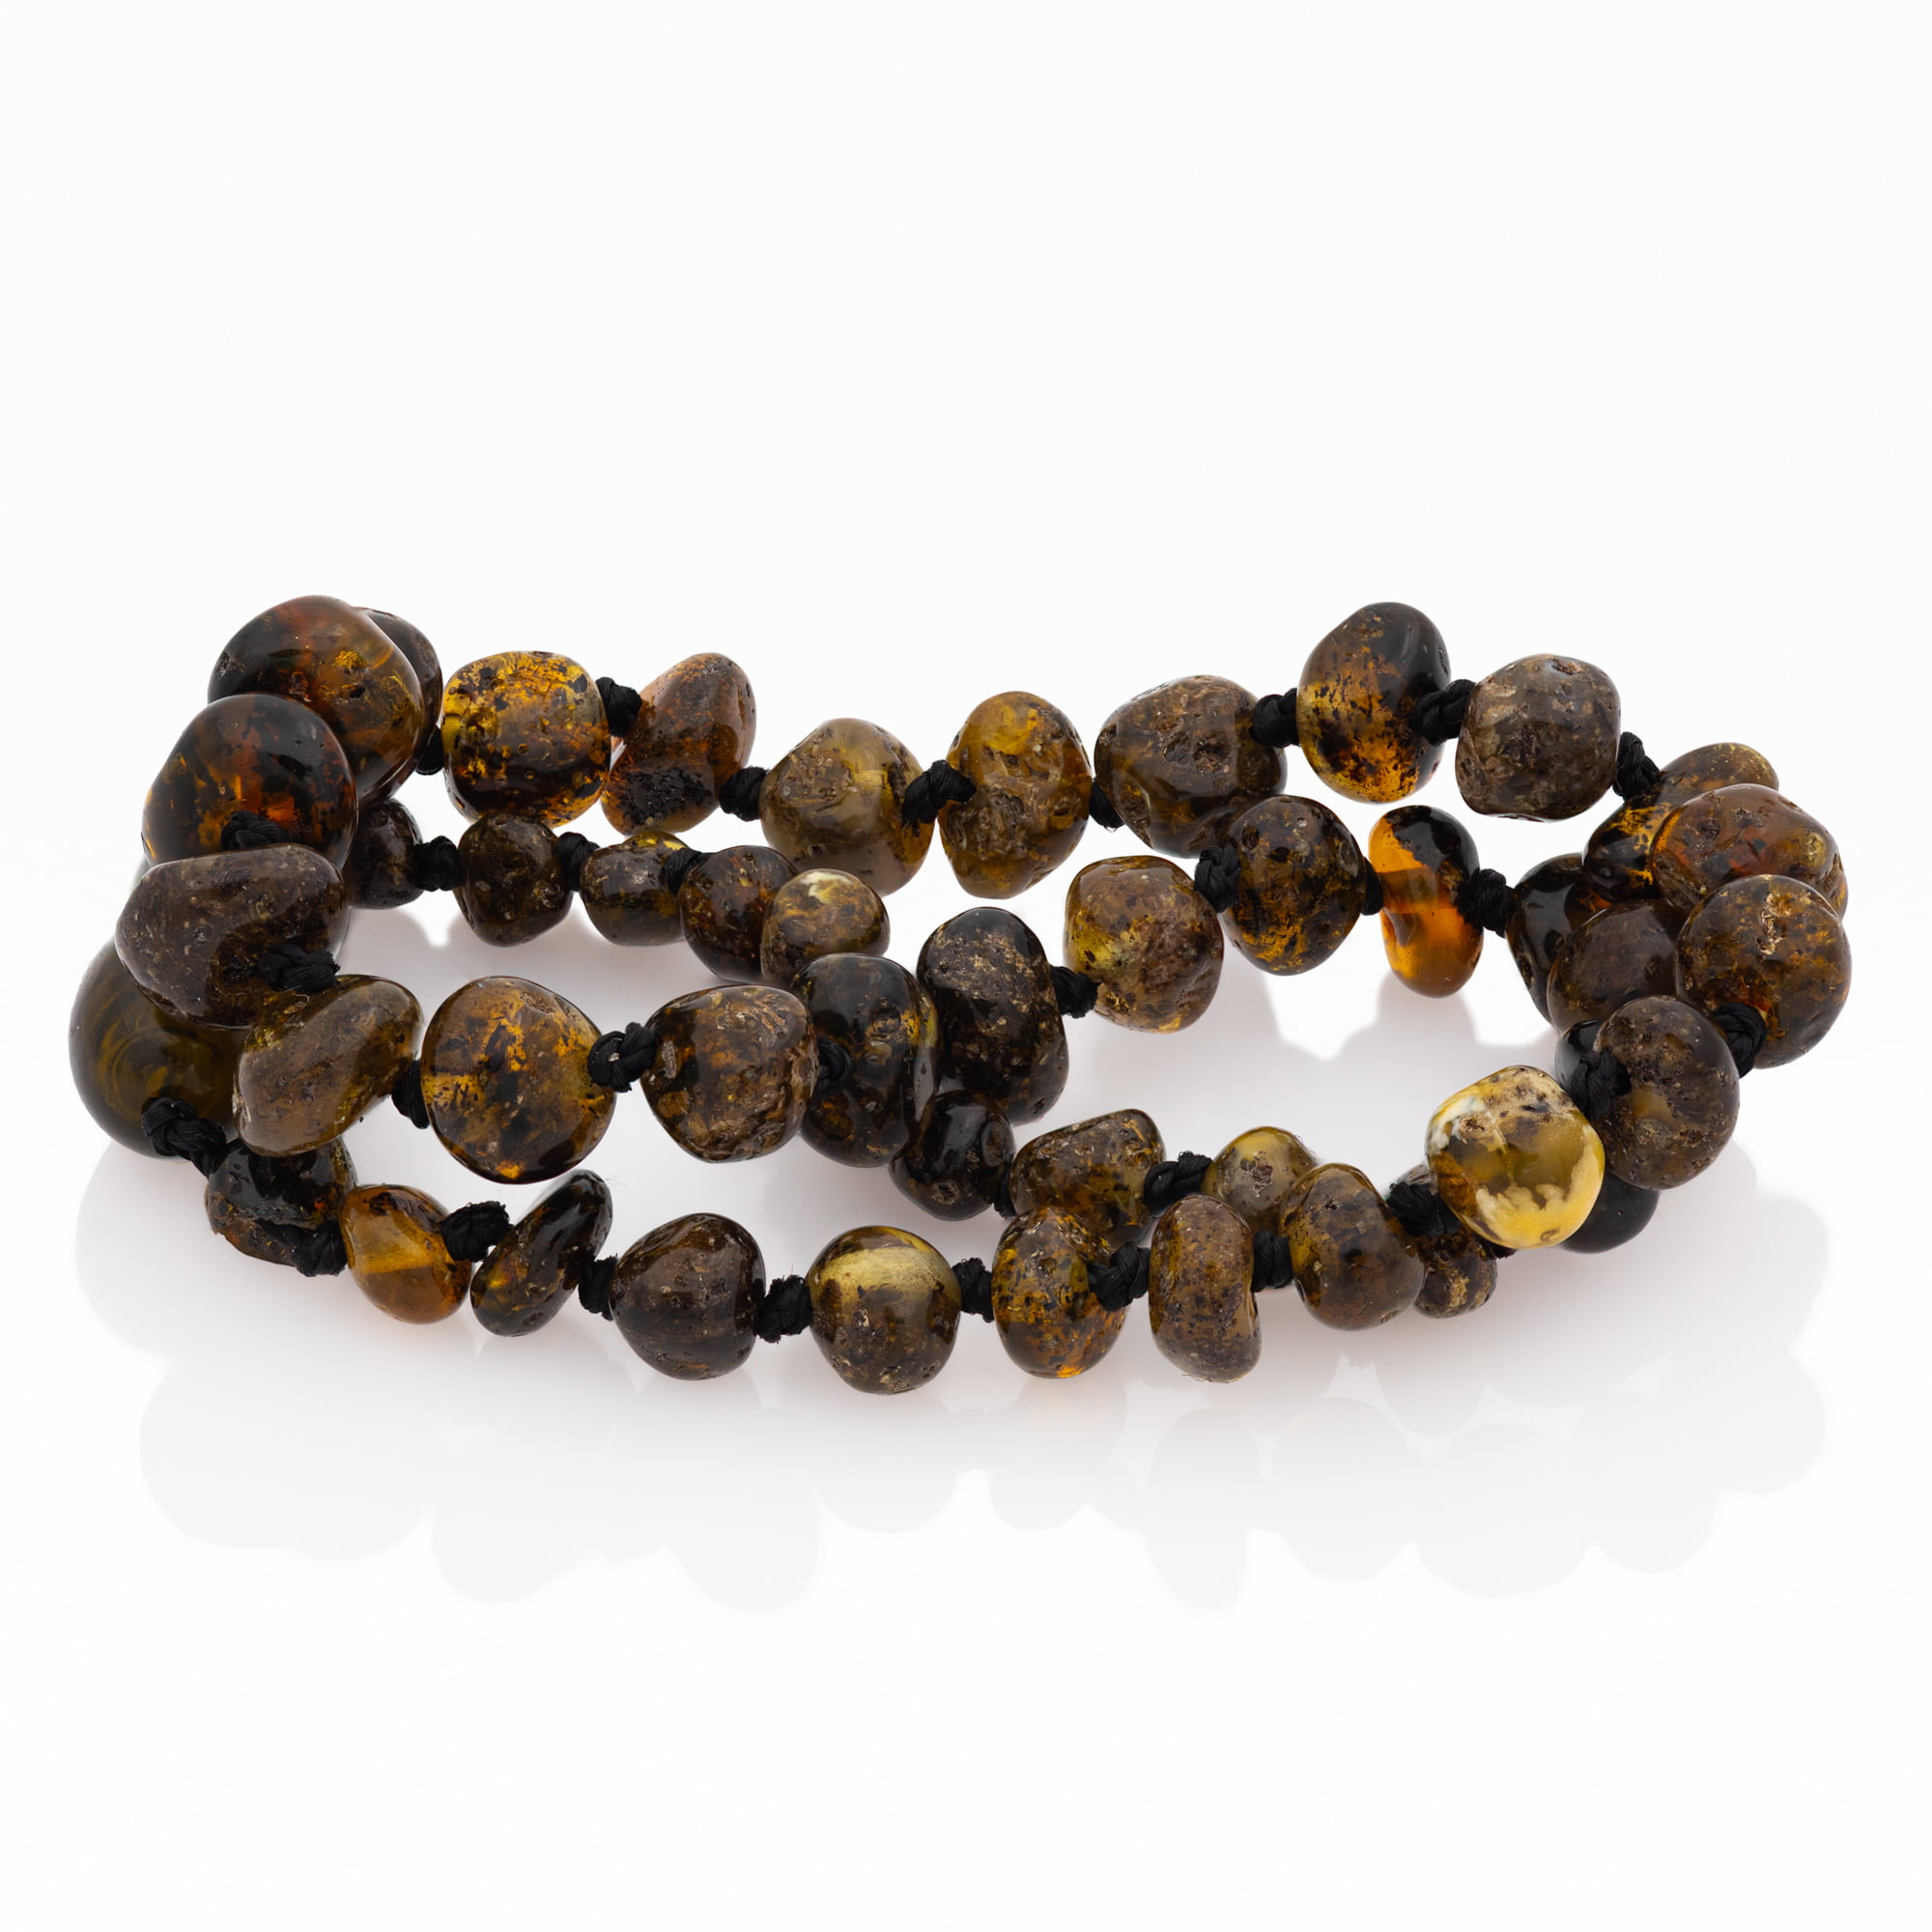 Details about   Love Charm Amber Bracelet beaded from Genuine Amber and Tiger's Eye